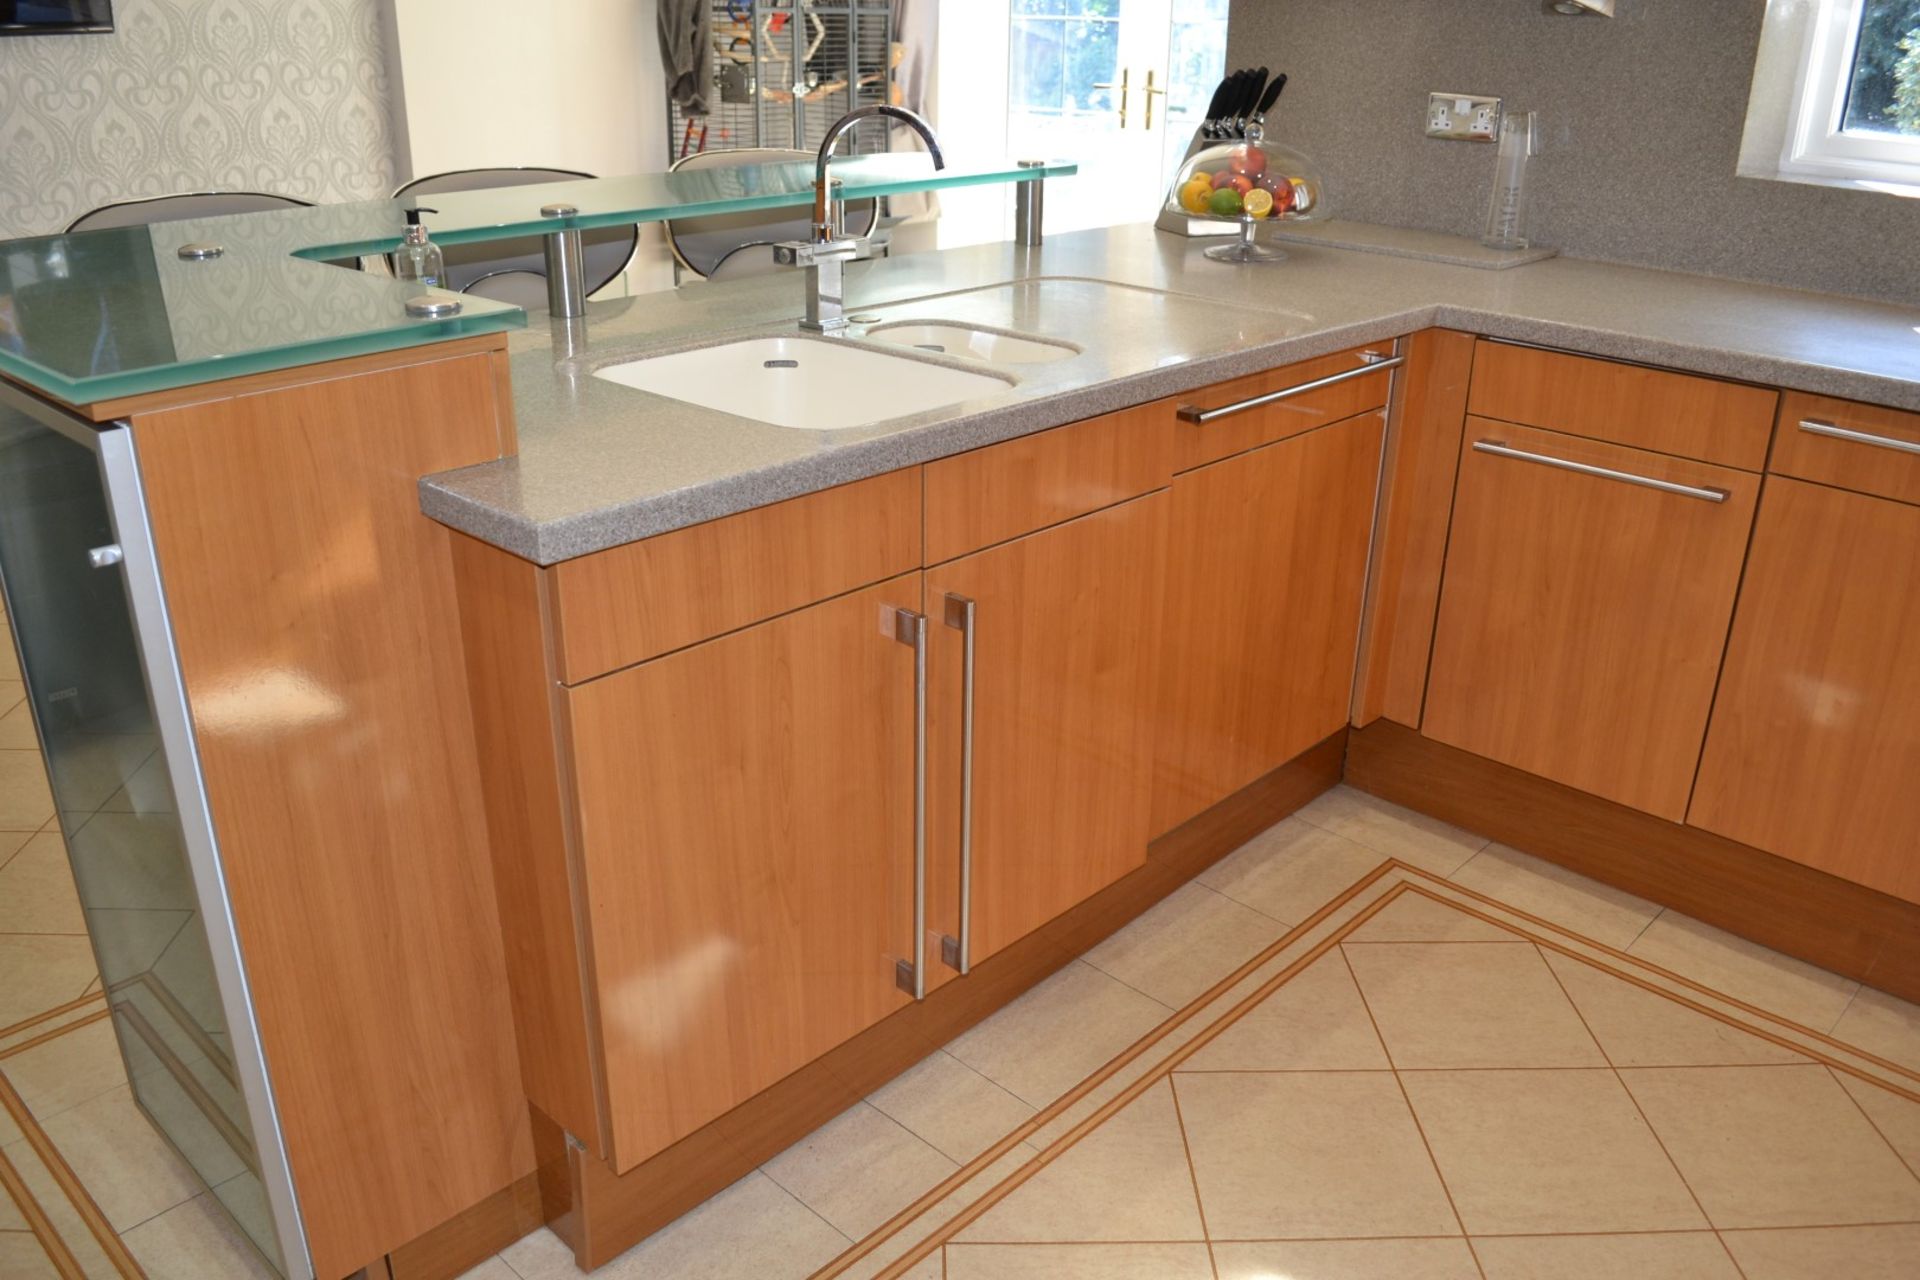 1 x Bespoke Siematic Gloss Fitted Kitchen With Corian Worktops, Frosted Glass Breakfast Bar - NO VAT - Image 16 of 91